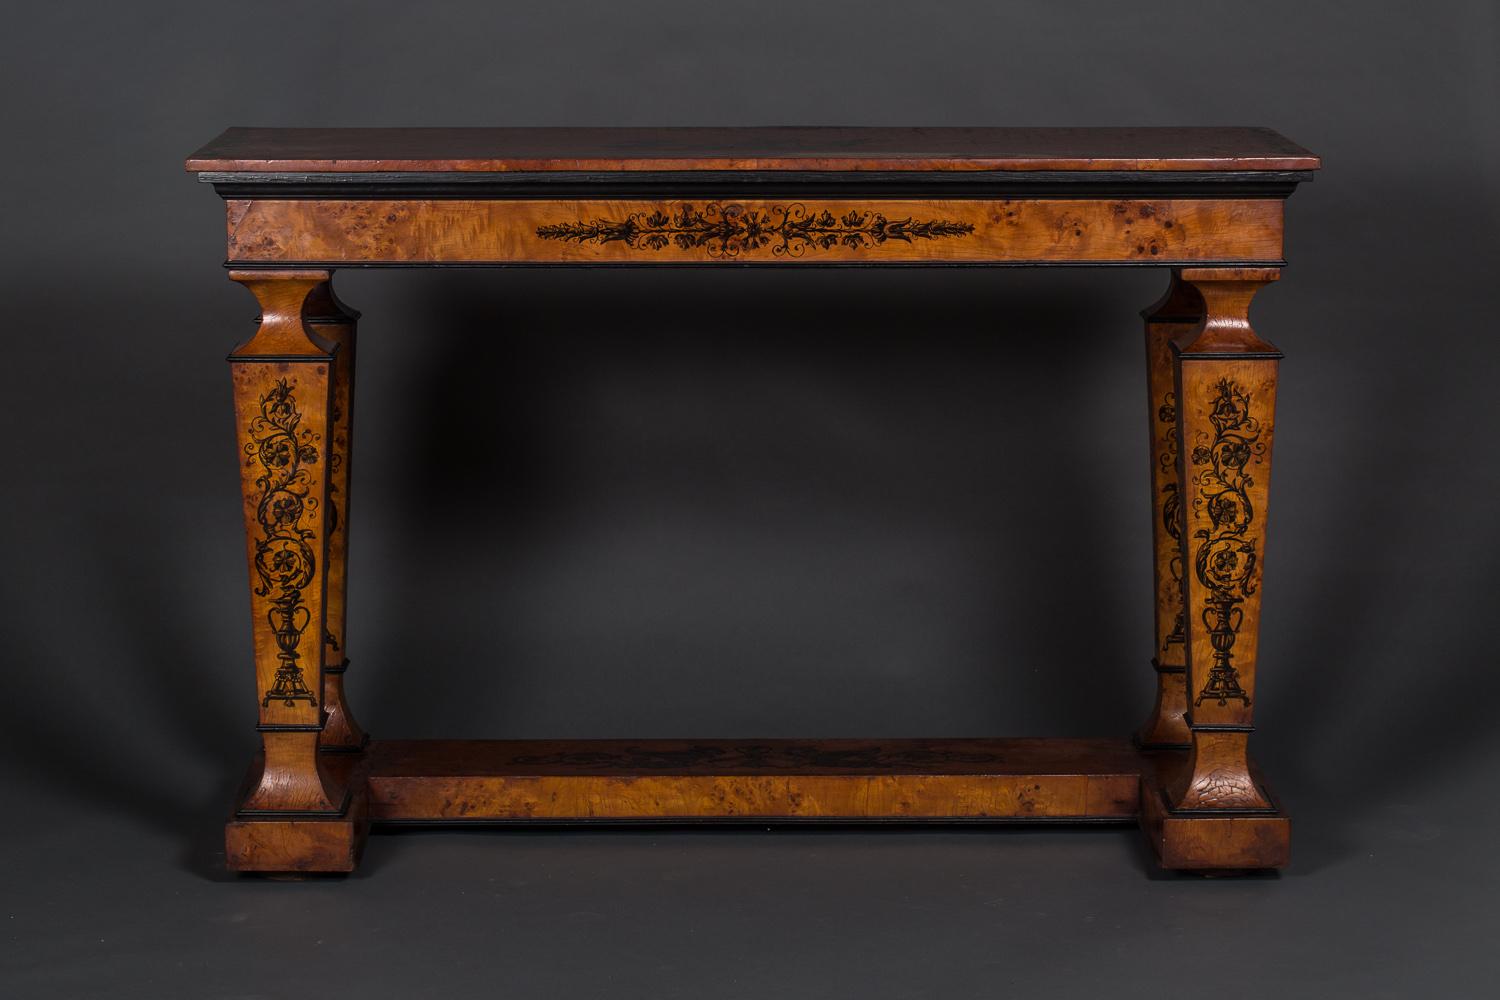 Large Italian 19th century console, beautiful and stately Italian antique console table from the mid-19th century. Constructed with burl veneer, and ebonized accents. Hand painted vignettes of classically inspired images decorate all parts of this